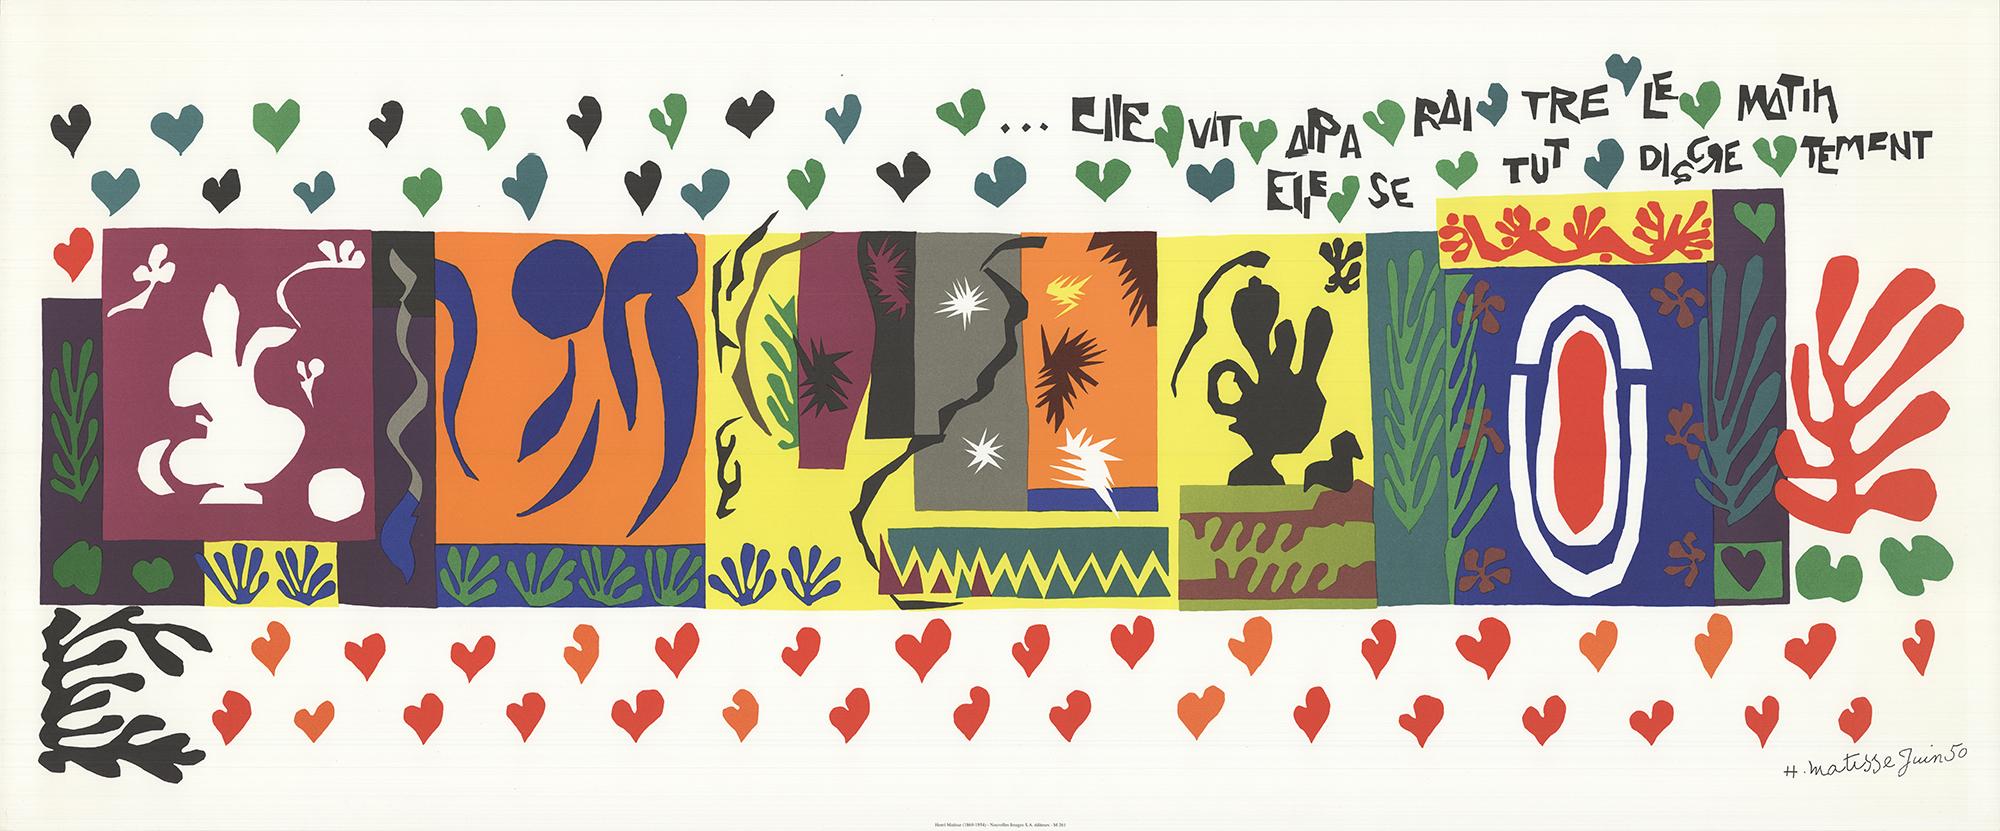 HENRI MATISSE The Thousand and One Nights 19.75" x 47.25" Lithograph 1991 - Print by Henri Matisse